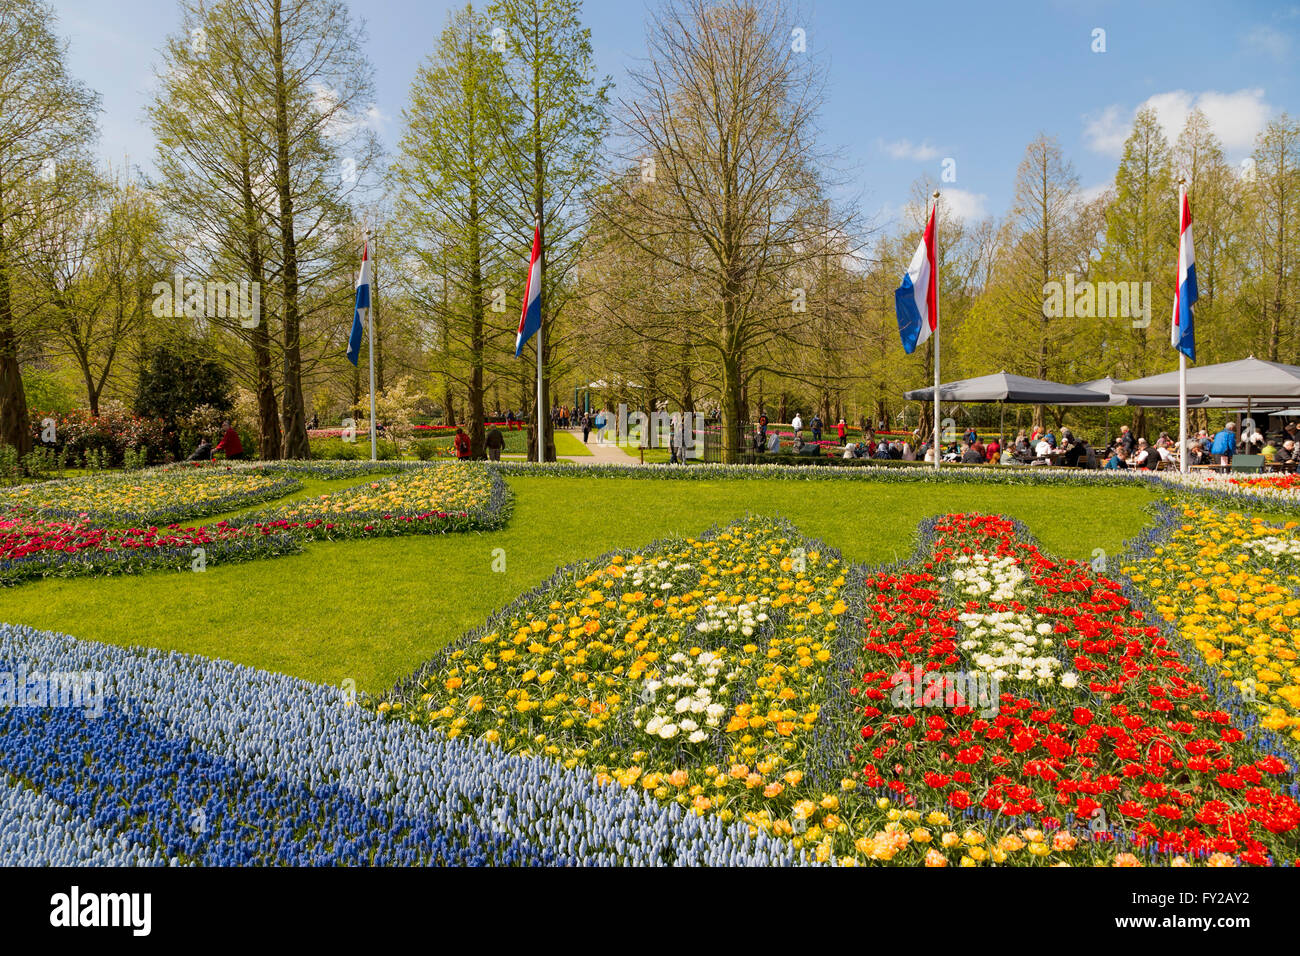 Flower mosaic ''The Golden Age'' at the Keukenhof, one of the world's largest flower gardens, Lisse, South Holland, Netherlands. Stock Photo